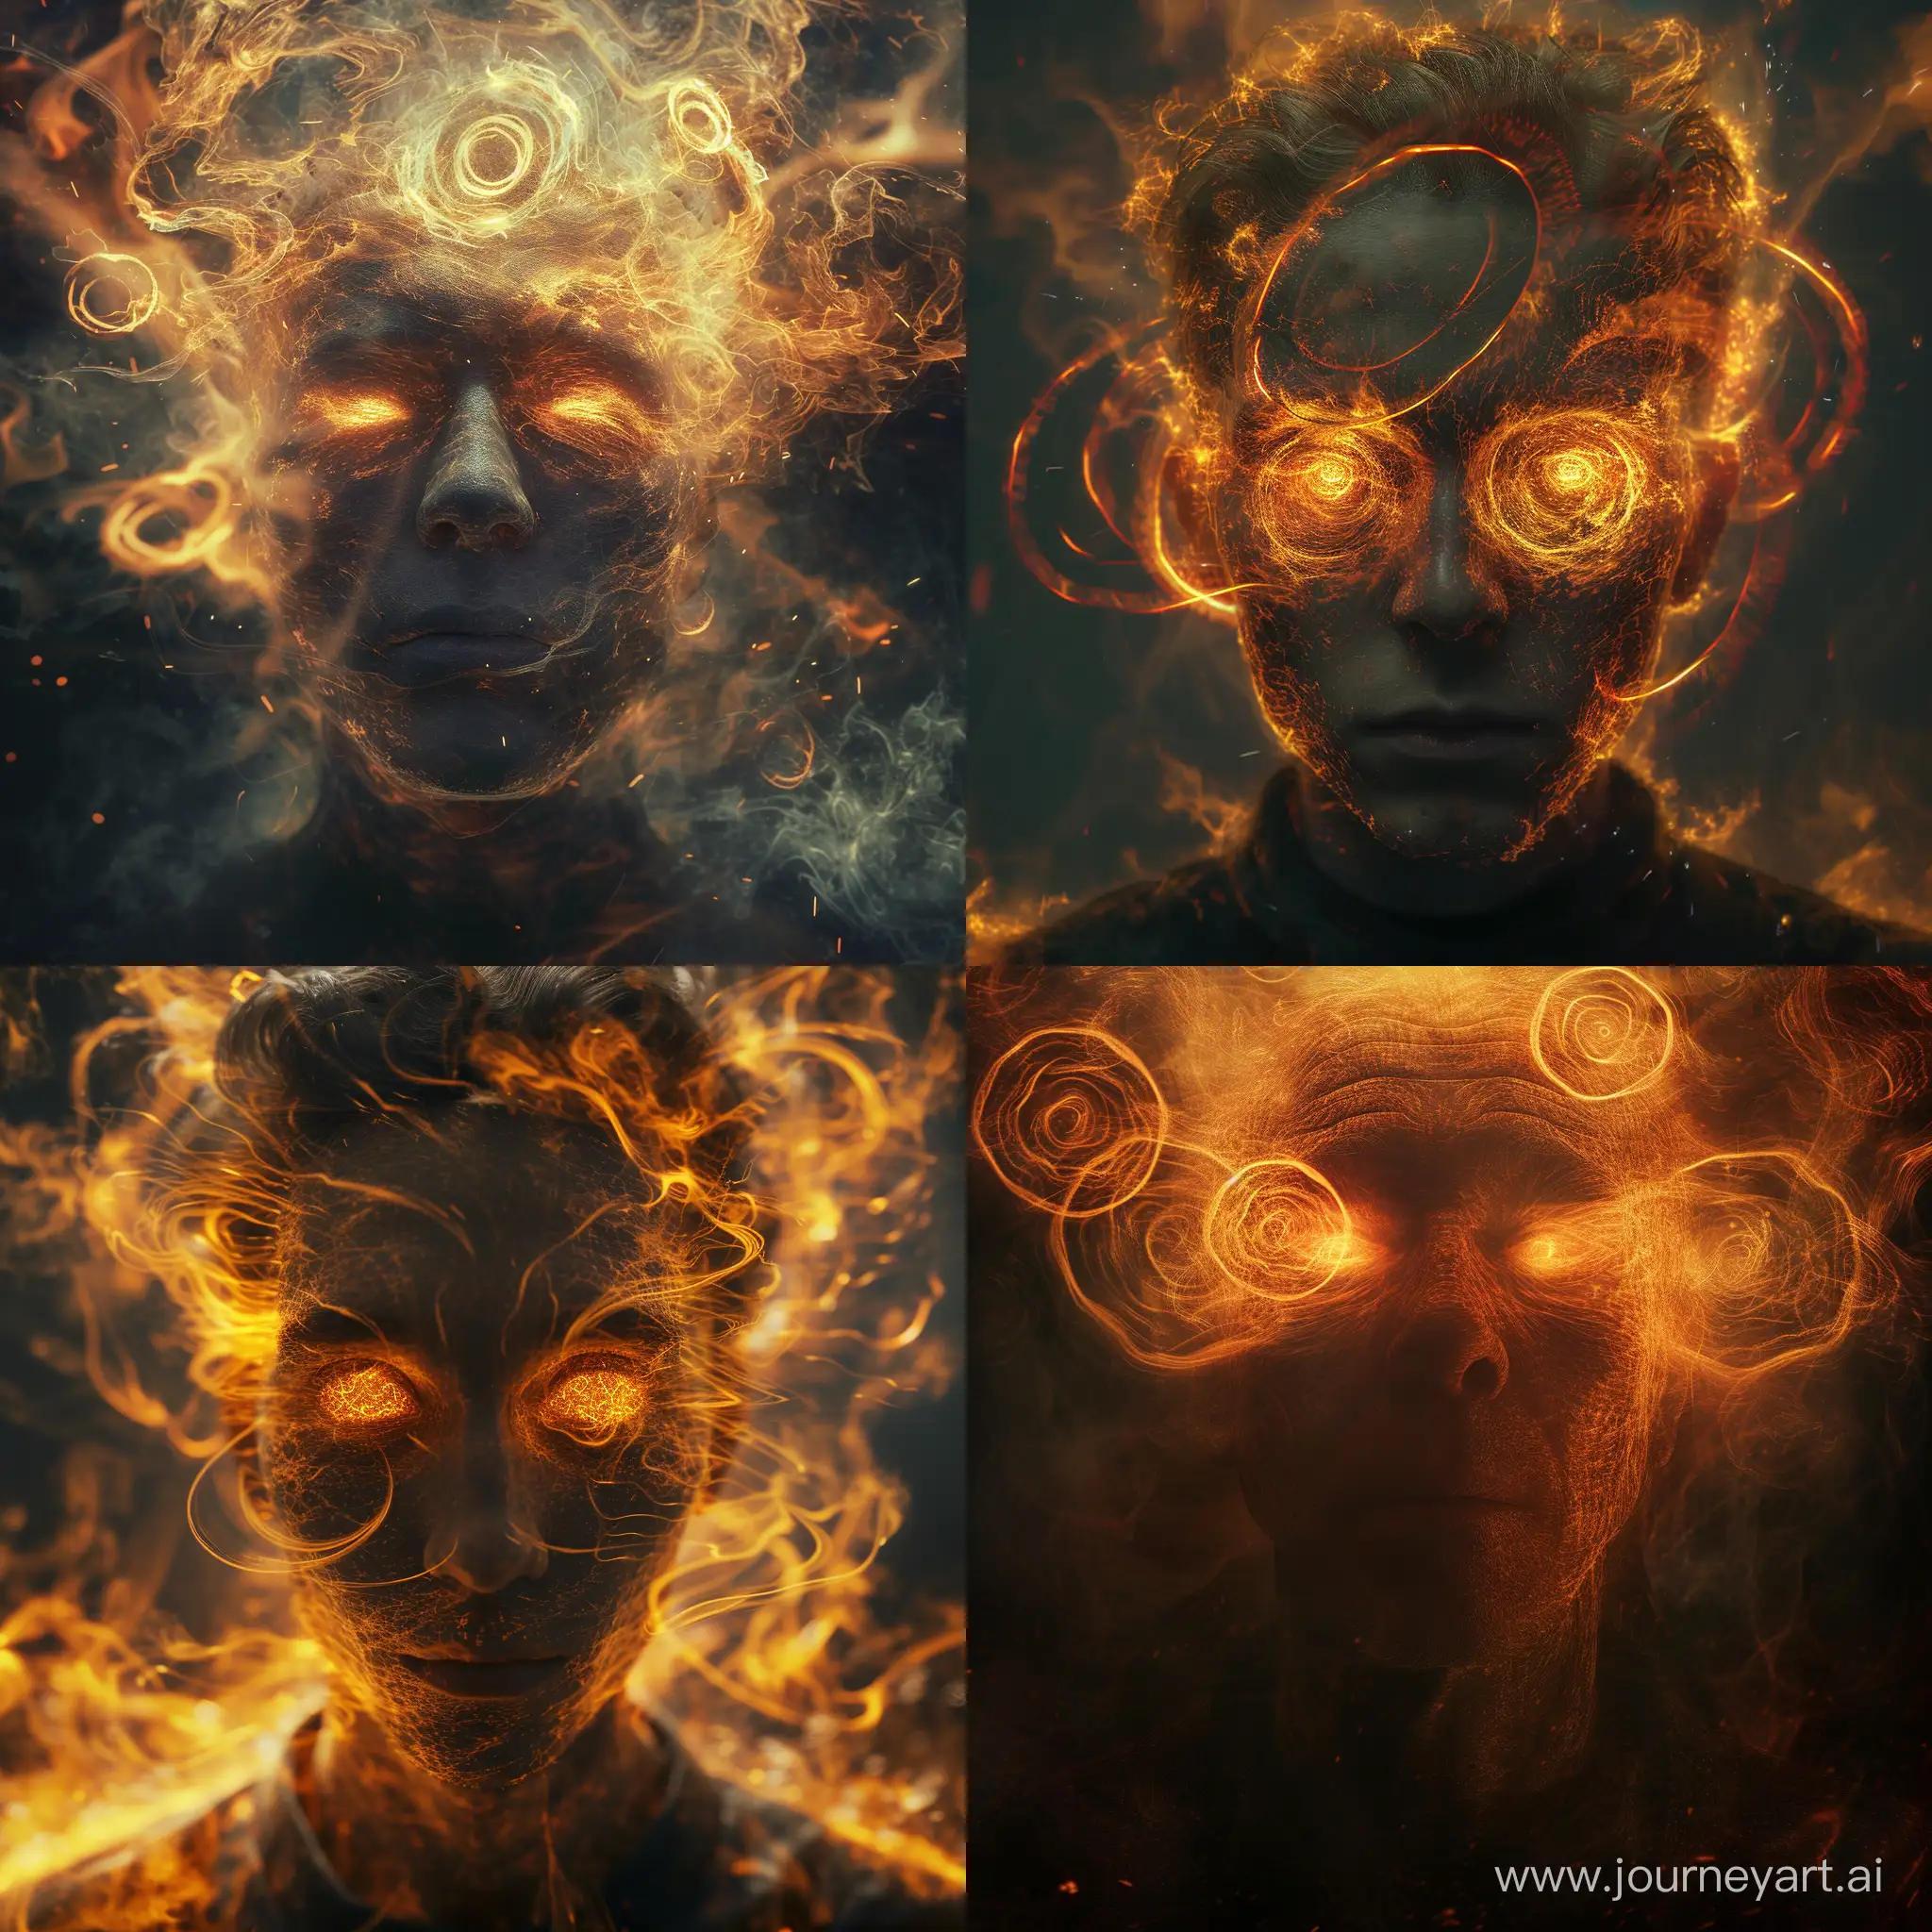 the traveler's face looked like a smoldering coal. The air in front of him was distorted by heat. His eyes resembled rings of flame, shimmering in intricate patterns.